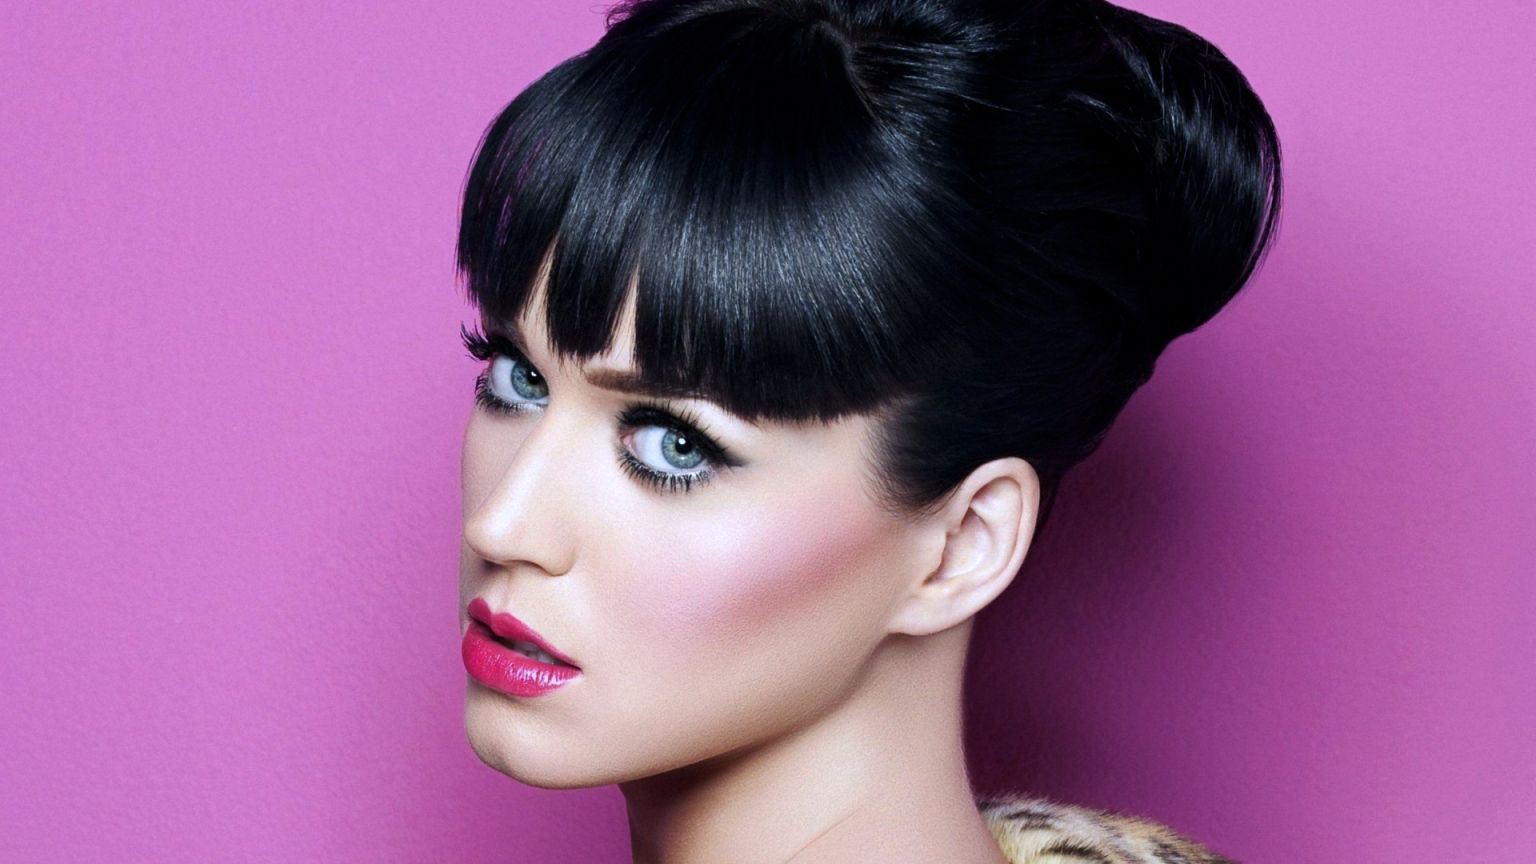 Katy Perry Eyes wallpaper in 1536x864 resolution